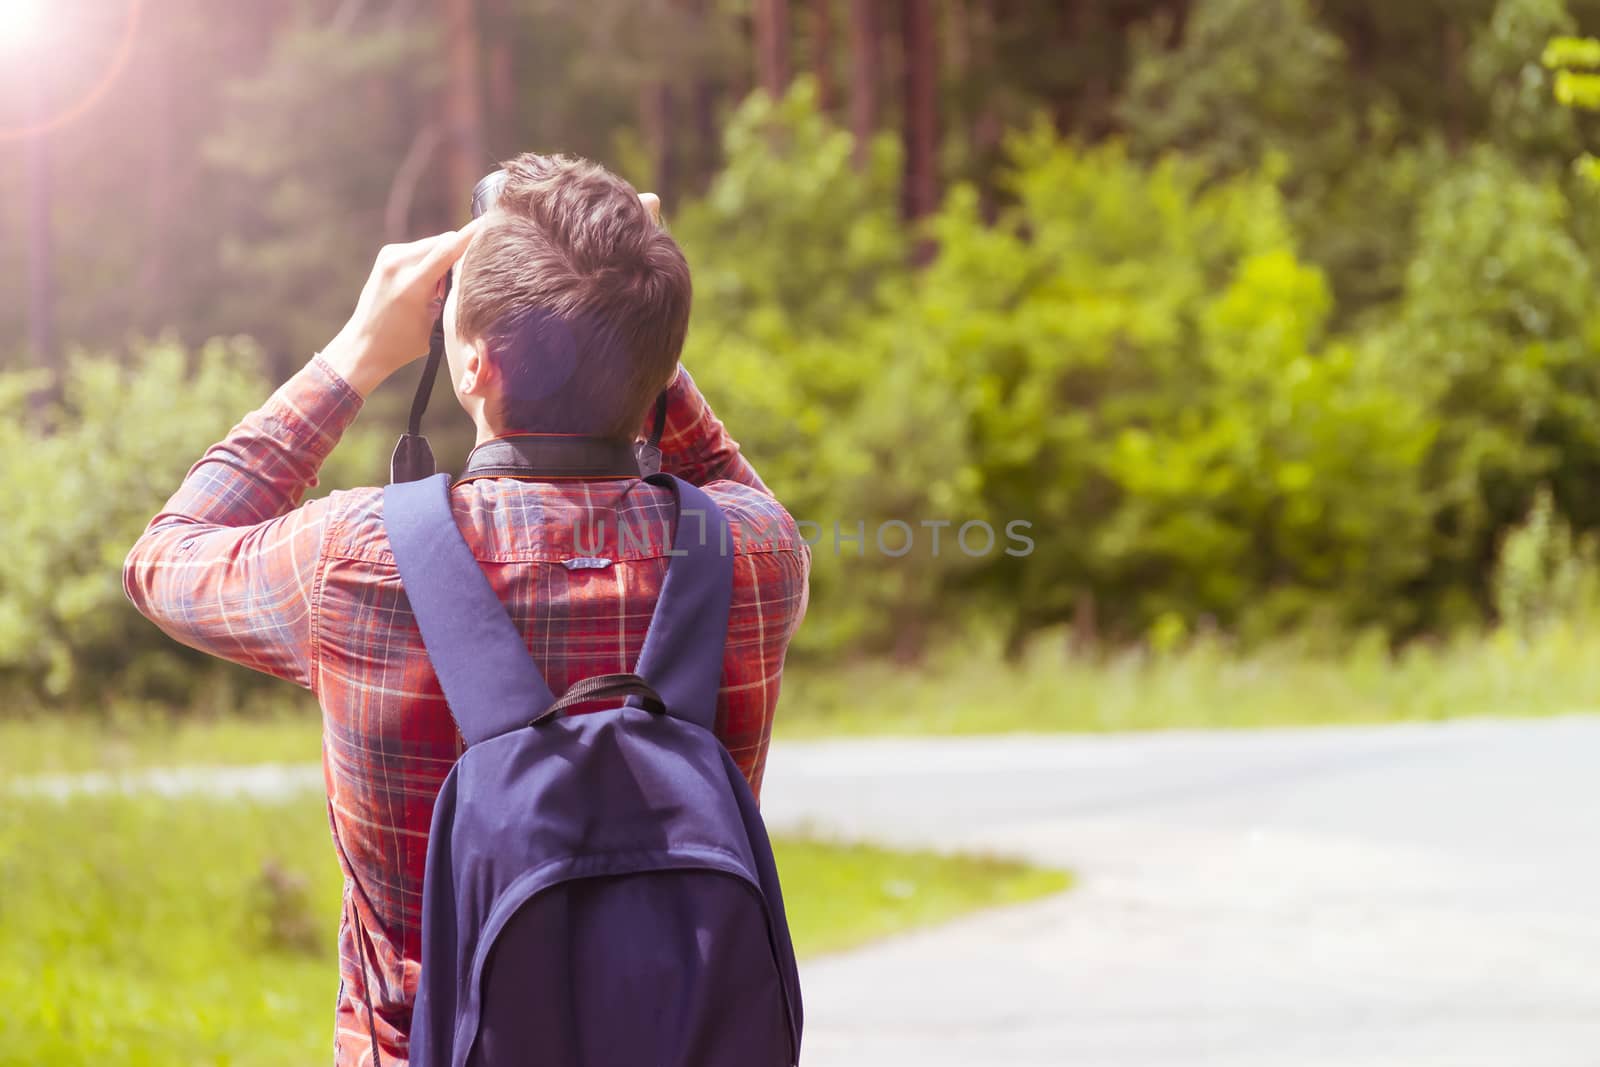 A young man takes photos of nature. Summer-Autumn.